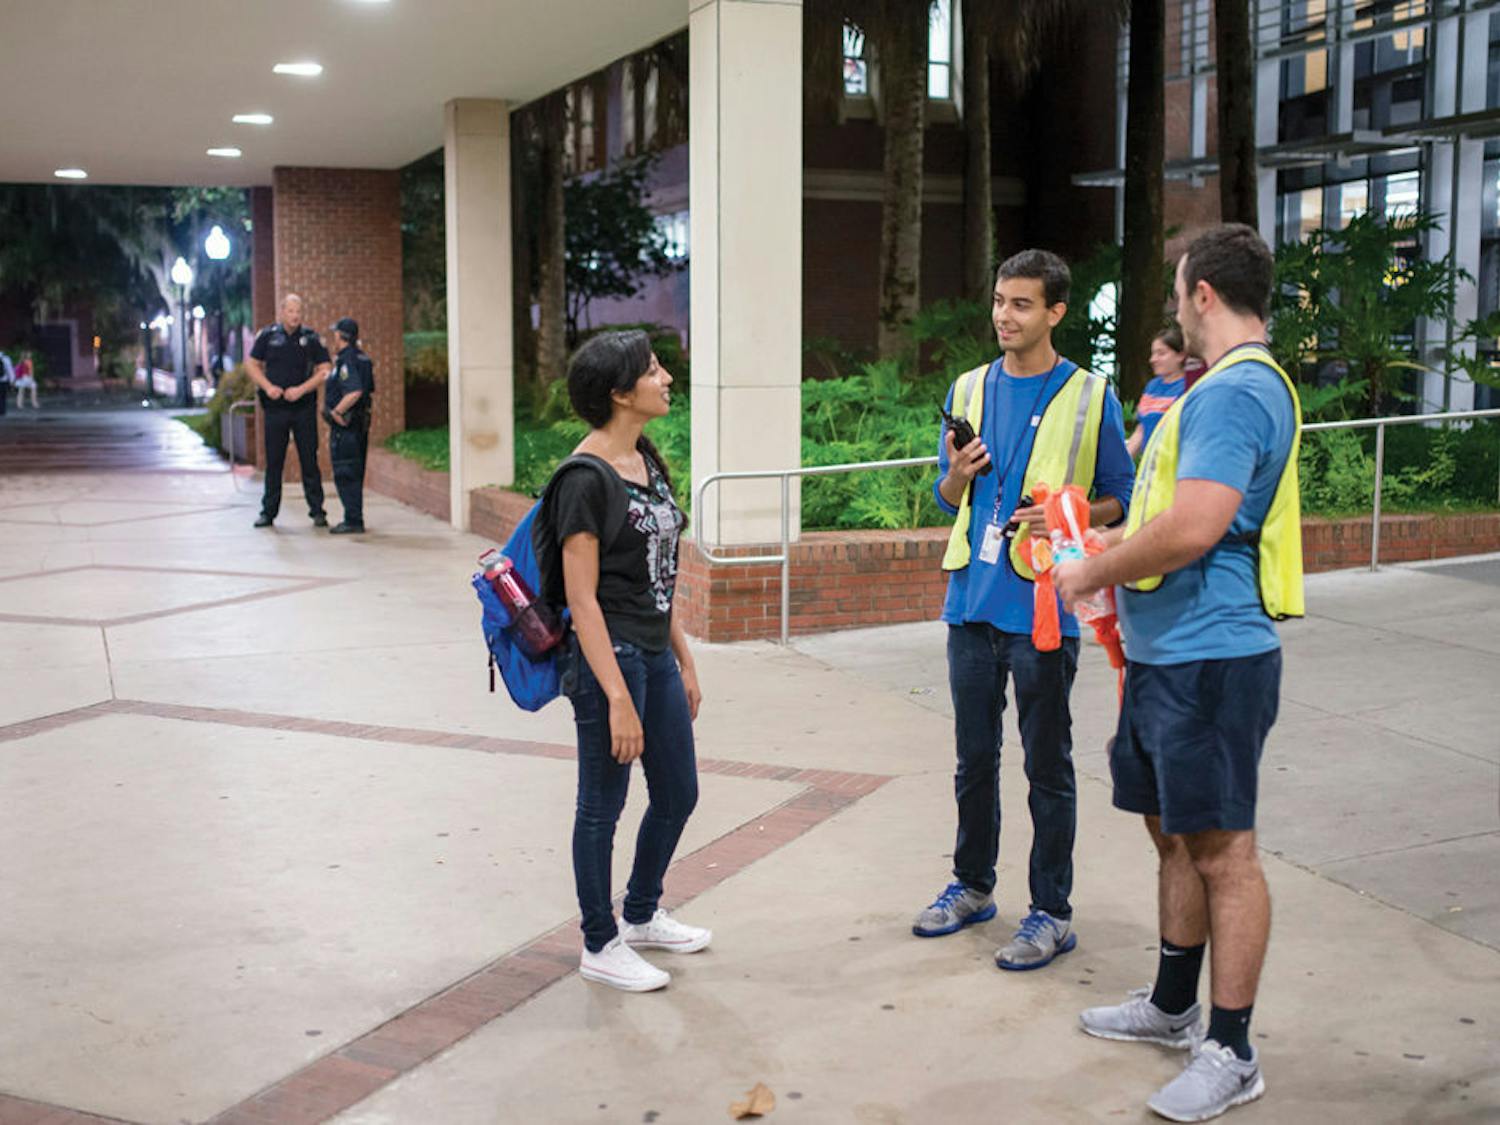 From left, UF nutritional sciences freshman Stephie Cyril, 17, requests a walking escort from student volunteers, UF political science junior Ryan Wolis, 20, and UF finance sophomore Nathaniel Reiff, 19, outside Library West on Tuesday night.